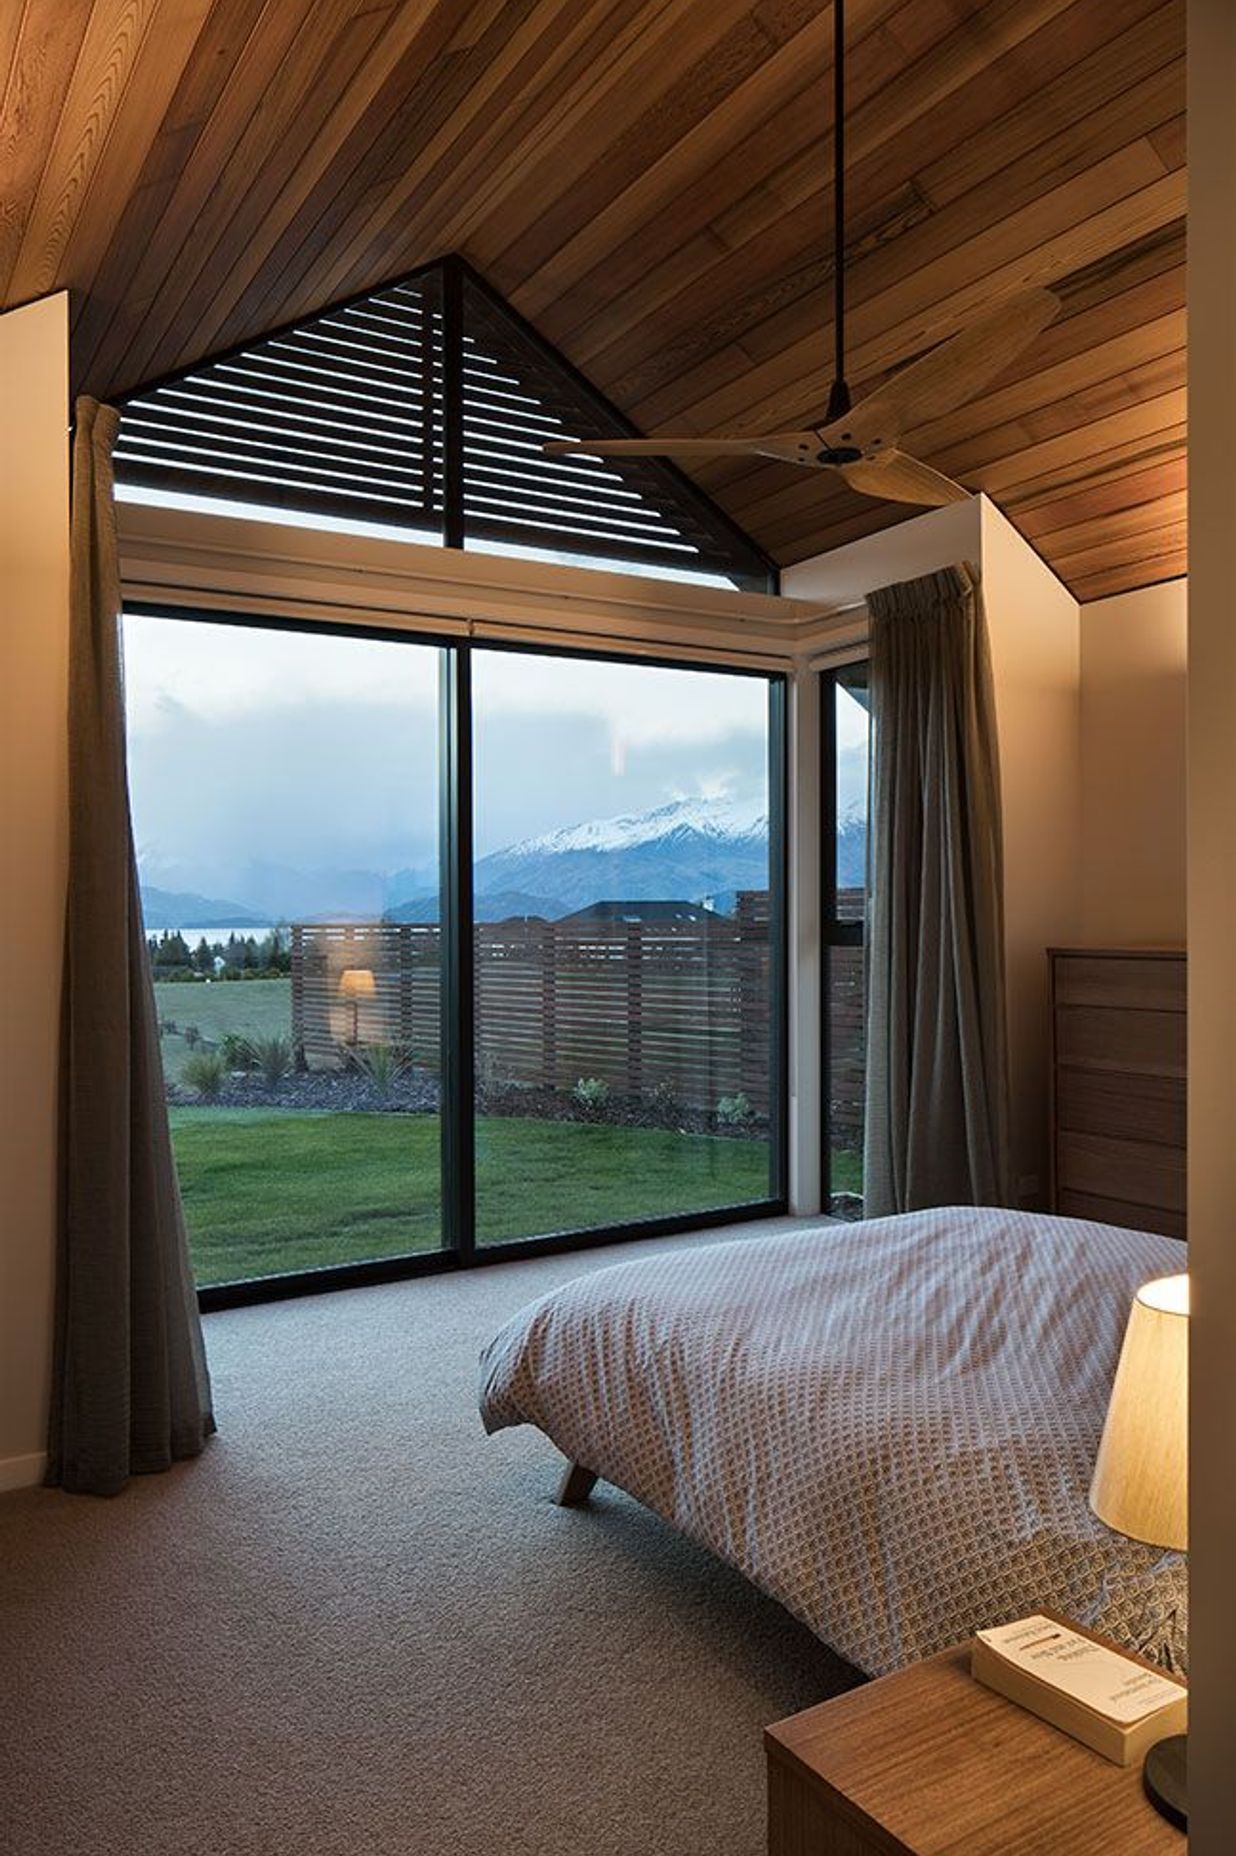 Floor-to-ceiling glazing allows for the view to be front and centre in this bedroom suite.